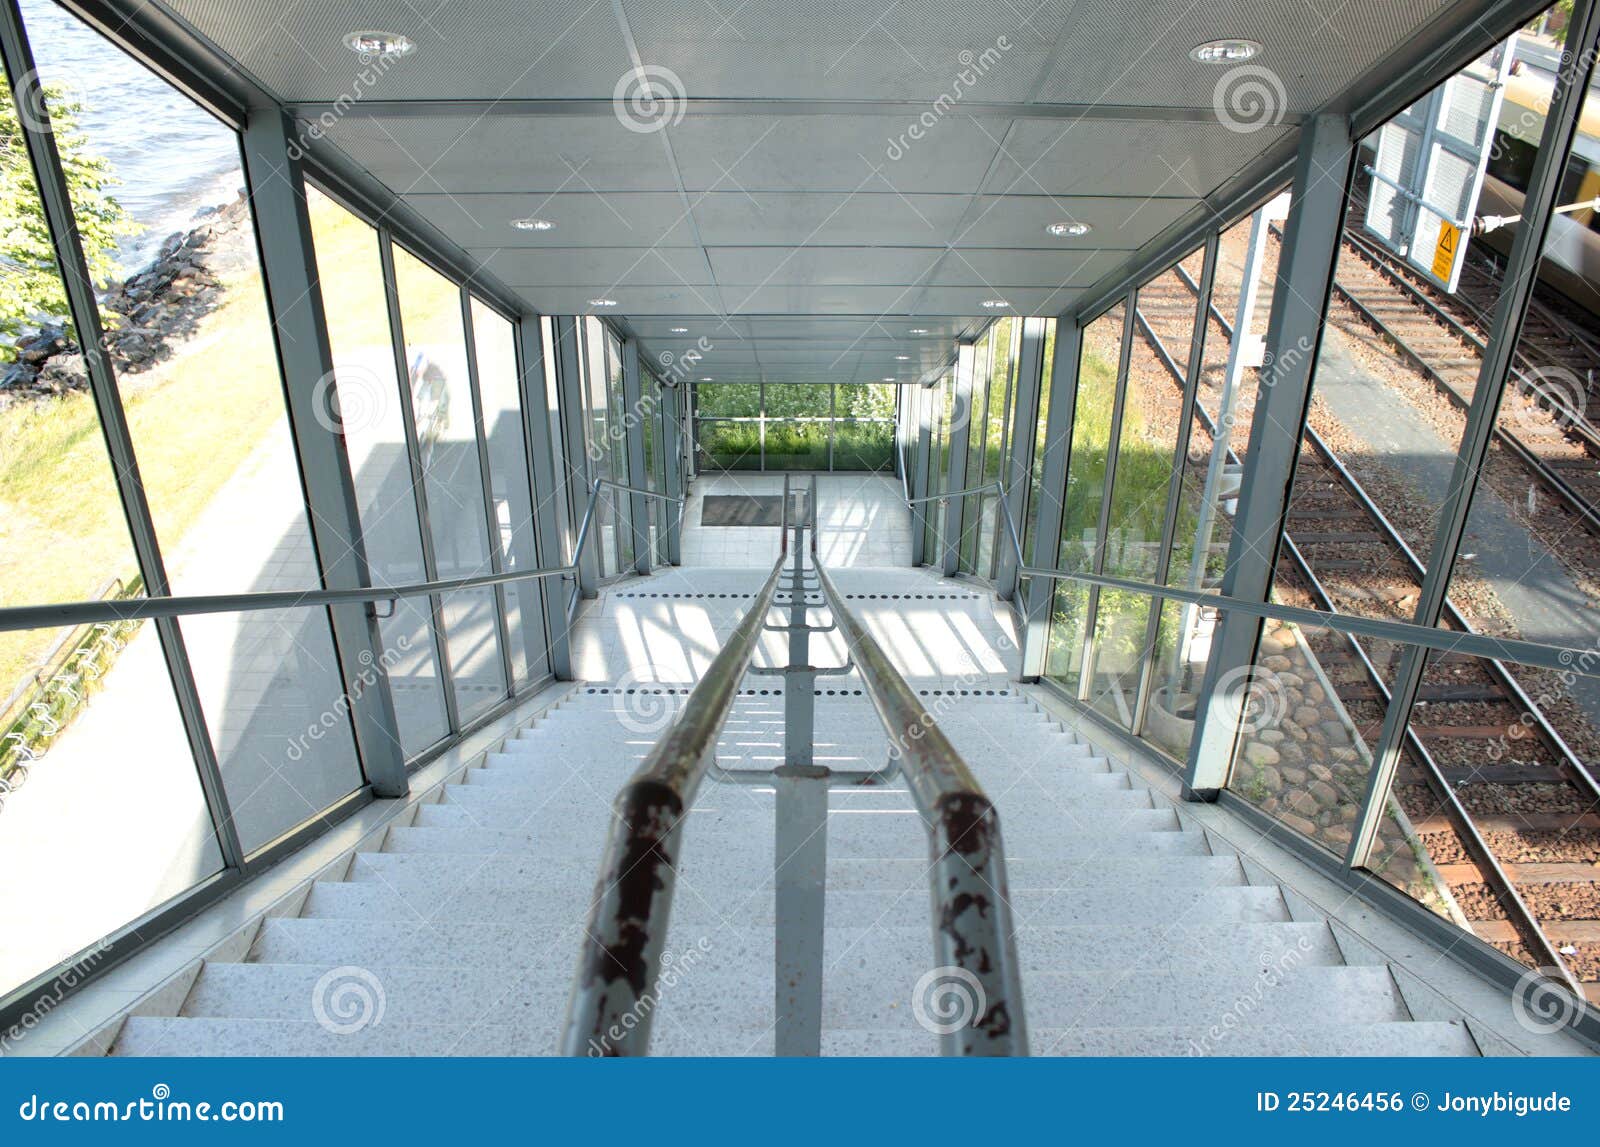 Stairway stock photo. Image of access, covered, stairs - 25246456